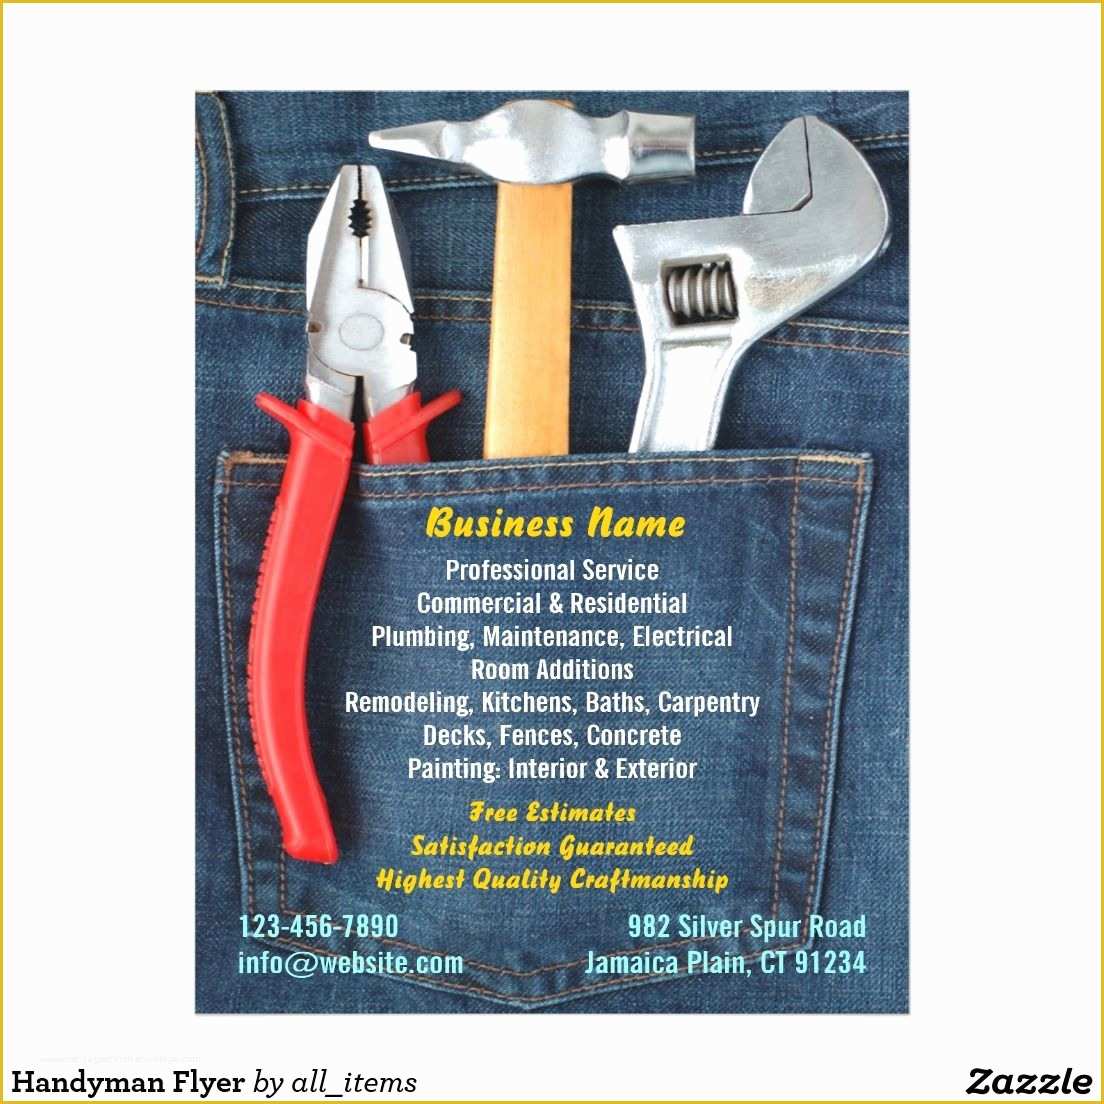 Free General Contractor Business Card Templates Of Handyman Flyer Handyman Flyer Stuff to